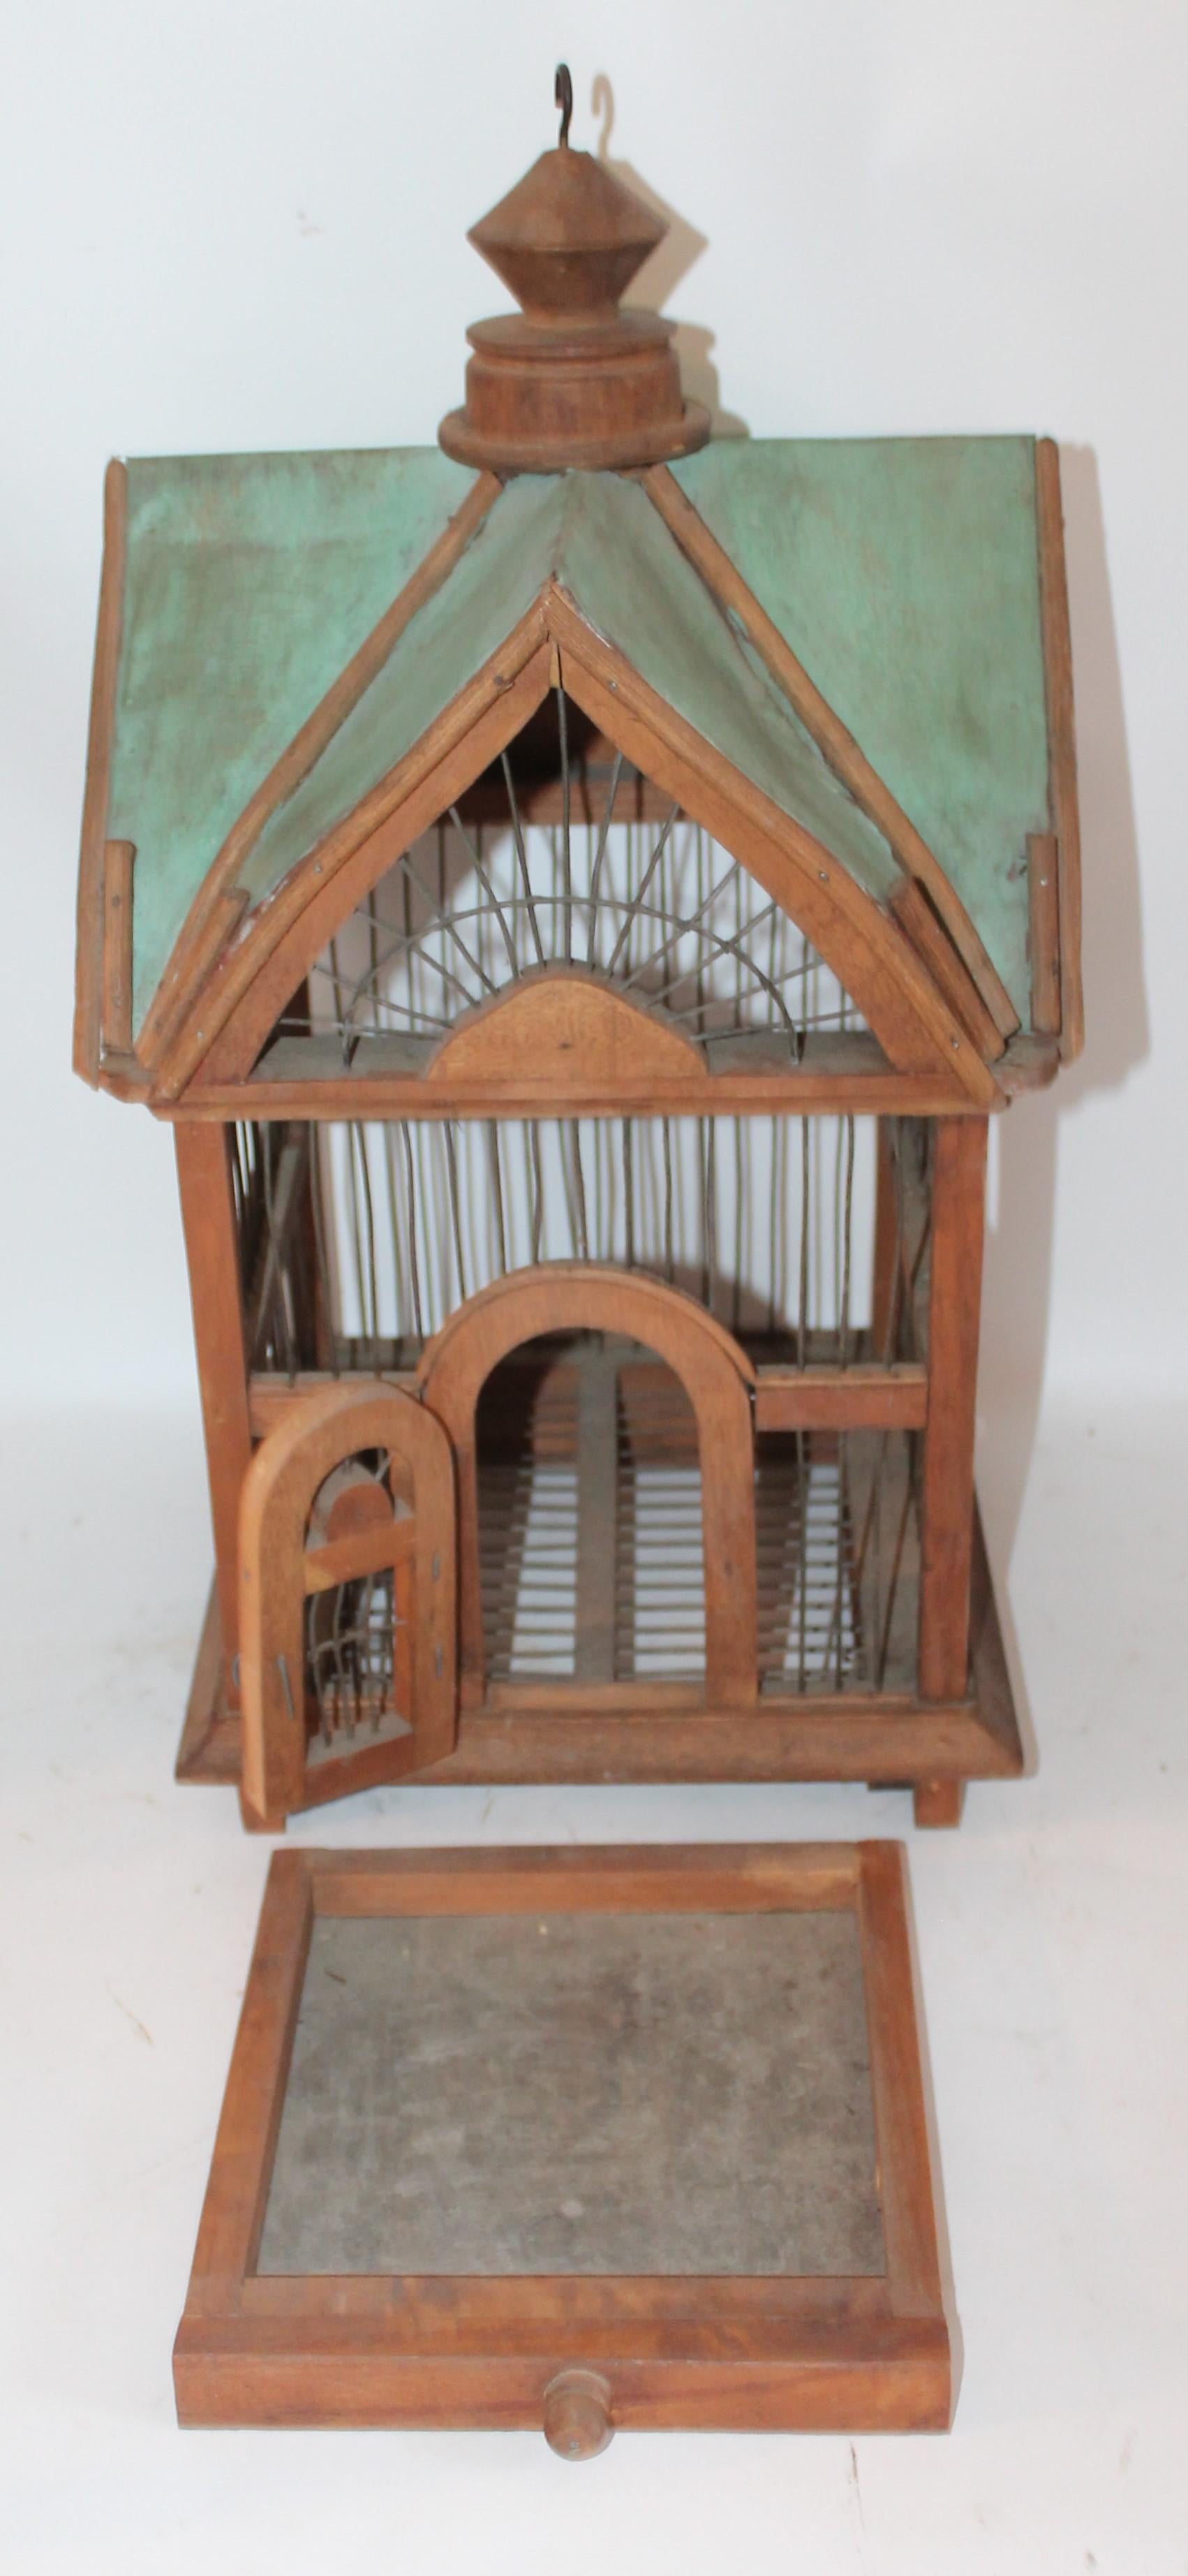 Hand-Crafted Bird House / Cage